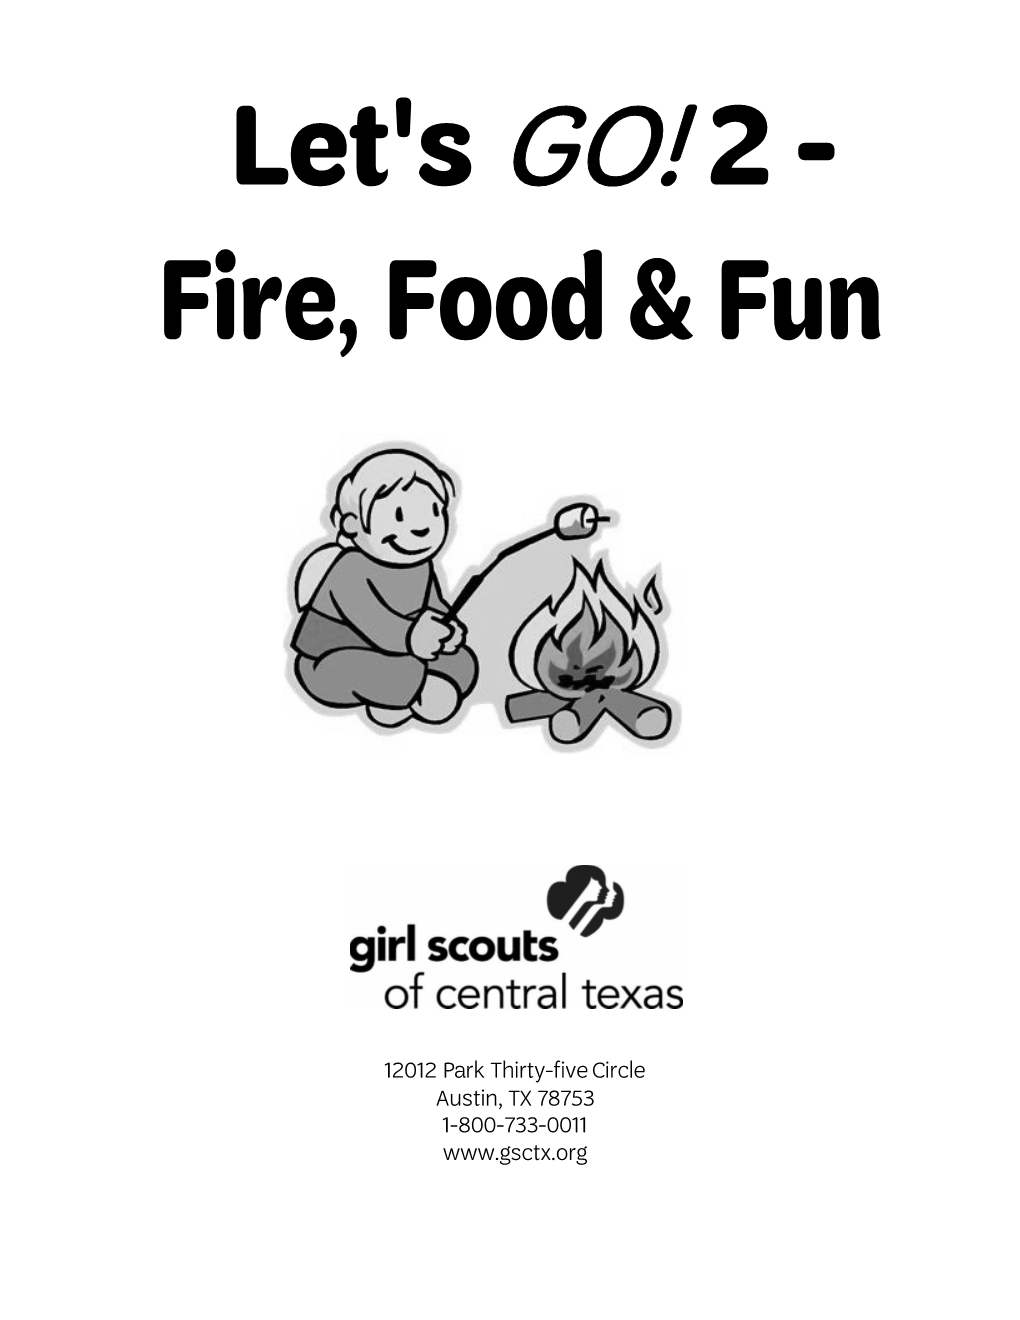 Let's GO! 2 - Fire, Food & Fun